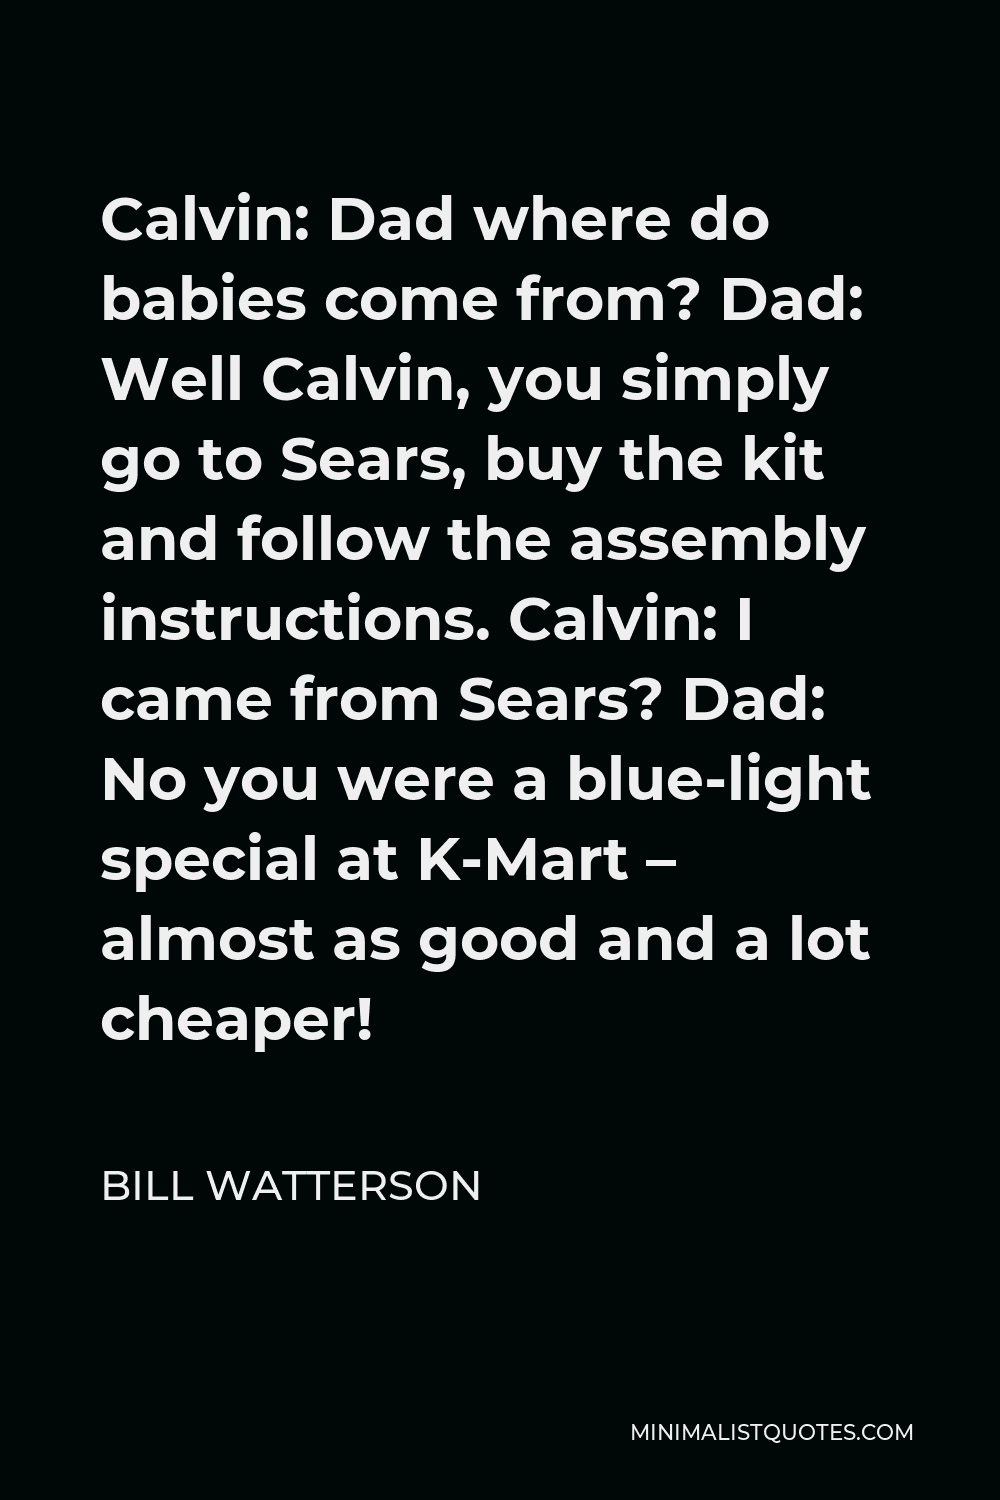 Bill Watterson Quote - Calvin: Dad where do babies come from? Dad: Well Calvin, you simply go to Sears, buy the kit and follow the assembly instructions. Calvin: I came from Sears? Dad: No you were a blue-light special at K-Mart – almost as good and a lot cheaper!